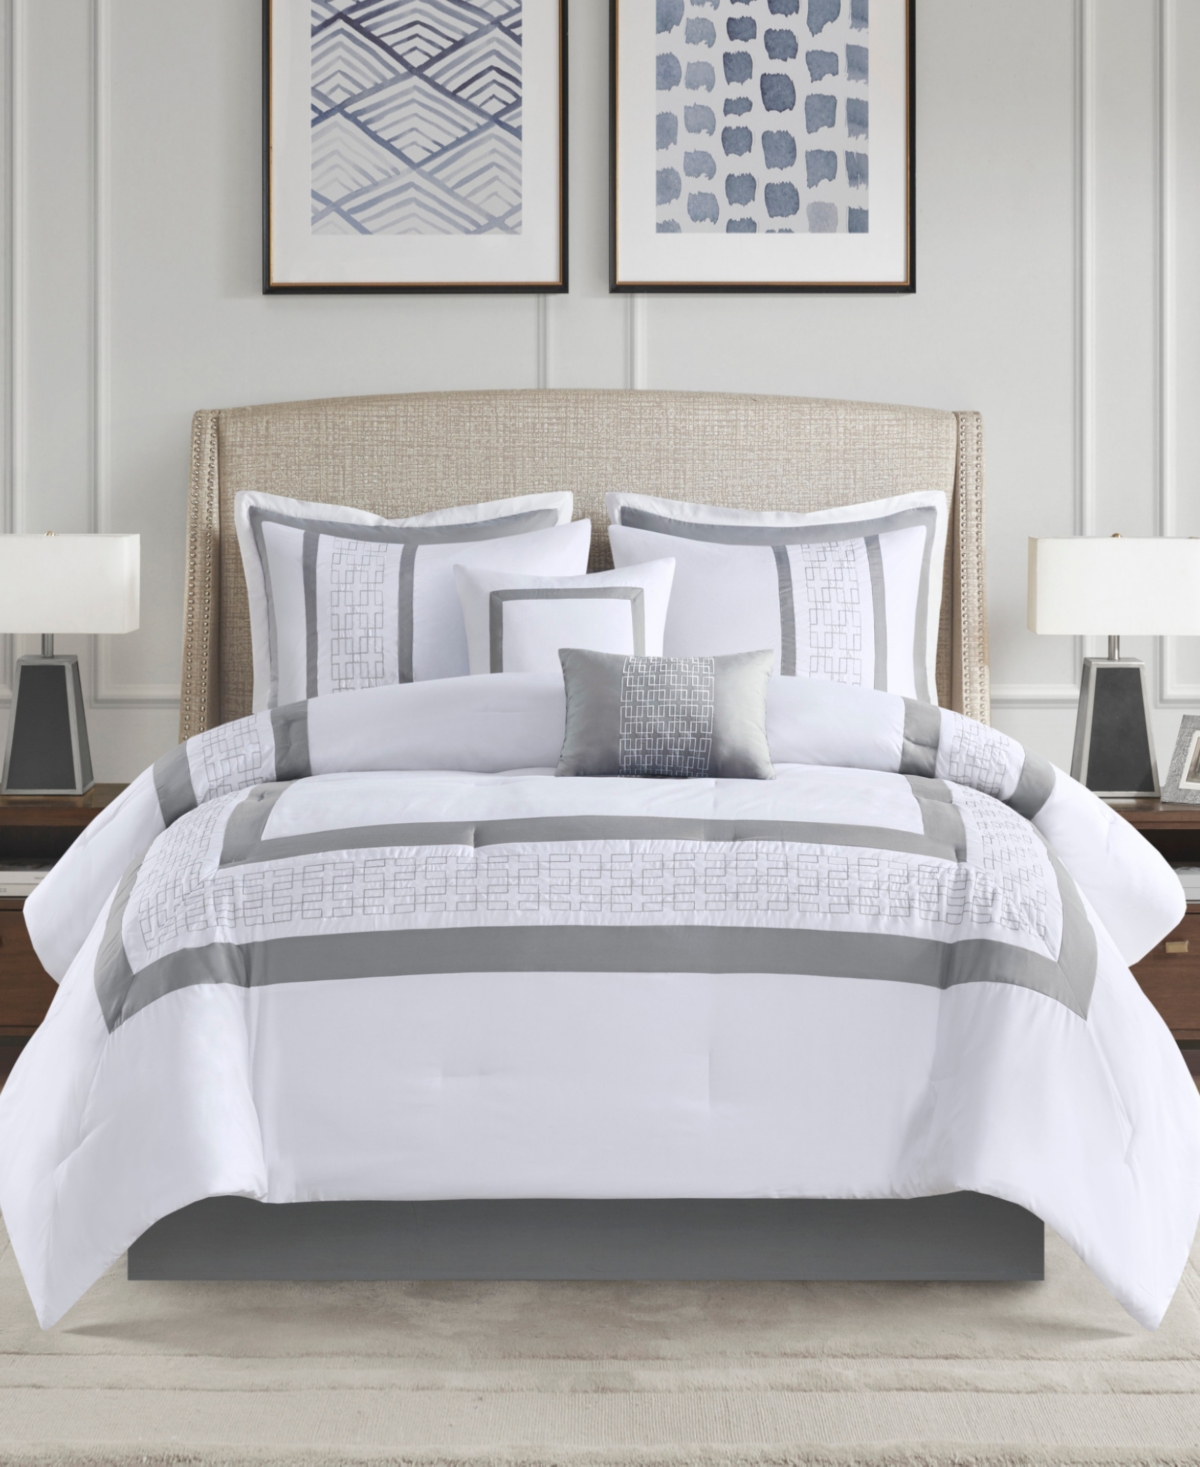 510 Design Powell Embroidered 8 Piece Comforter Set, California King In White